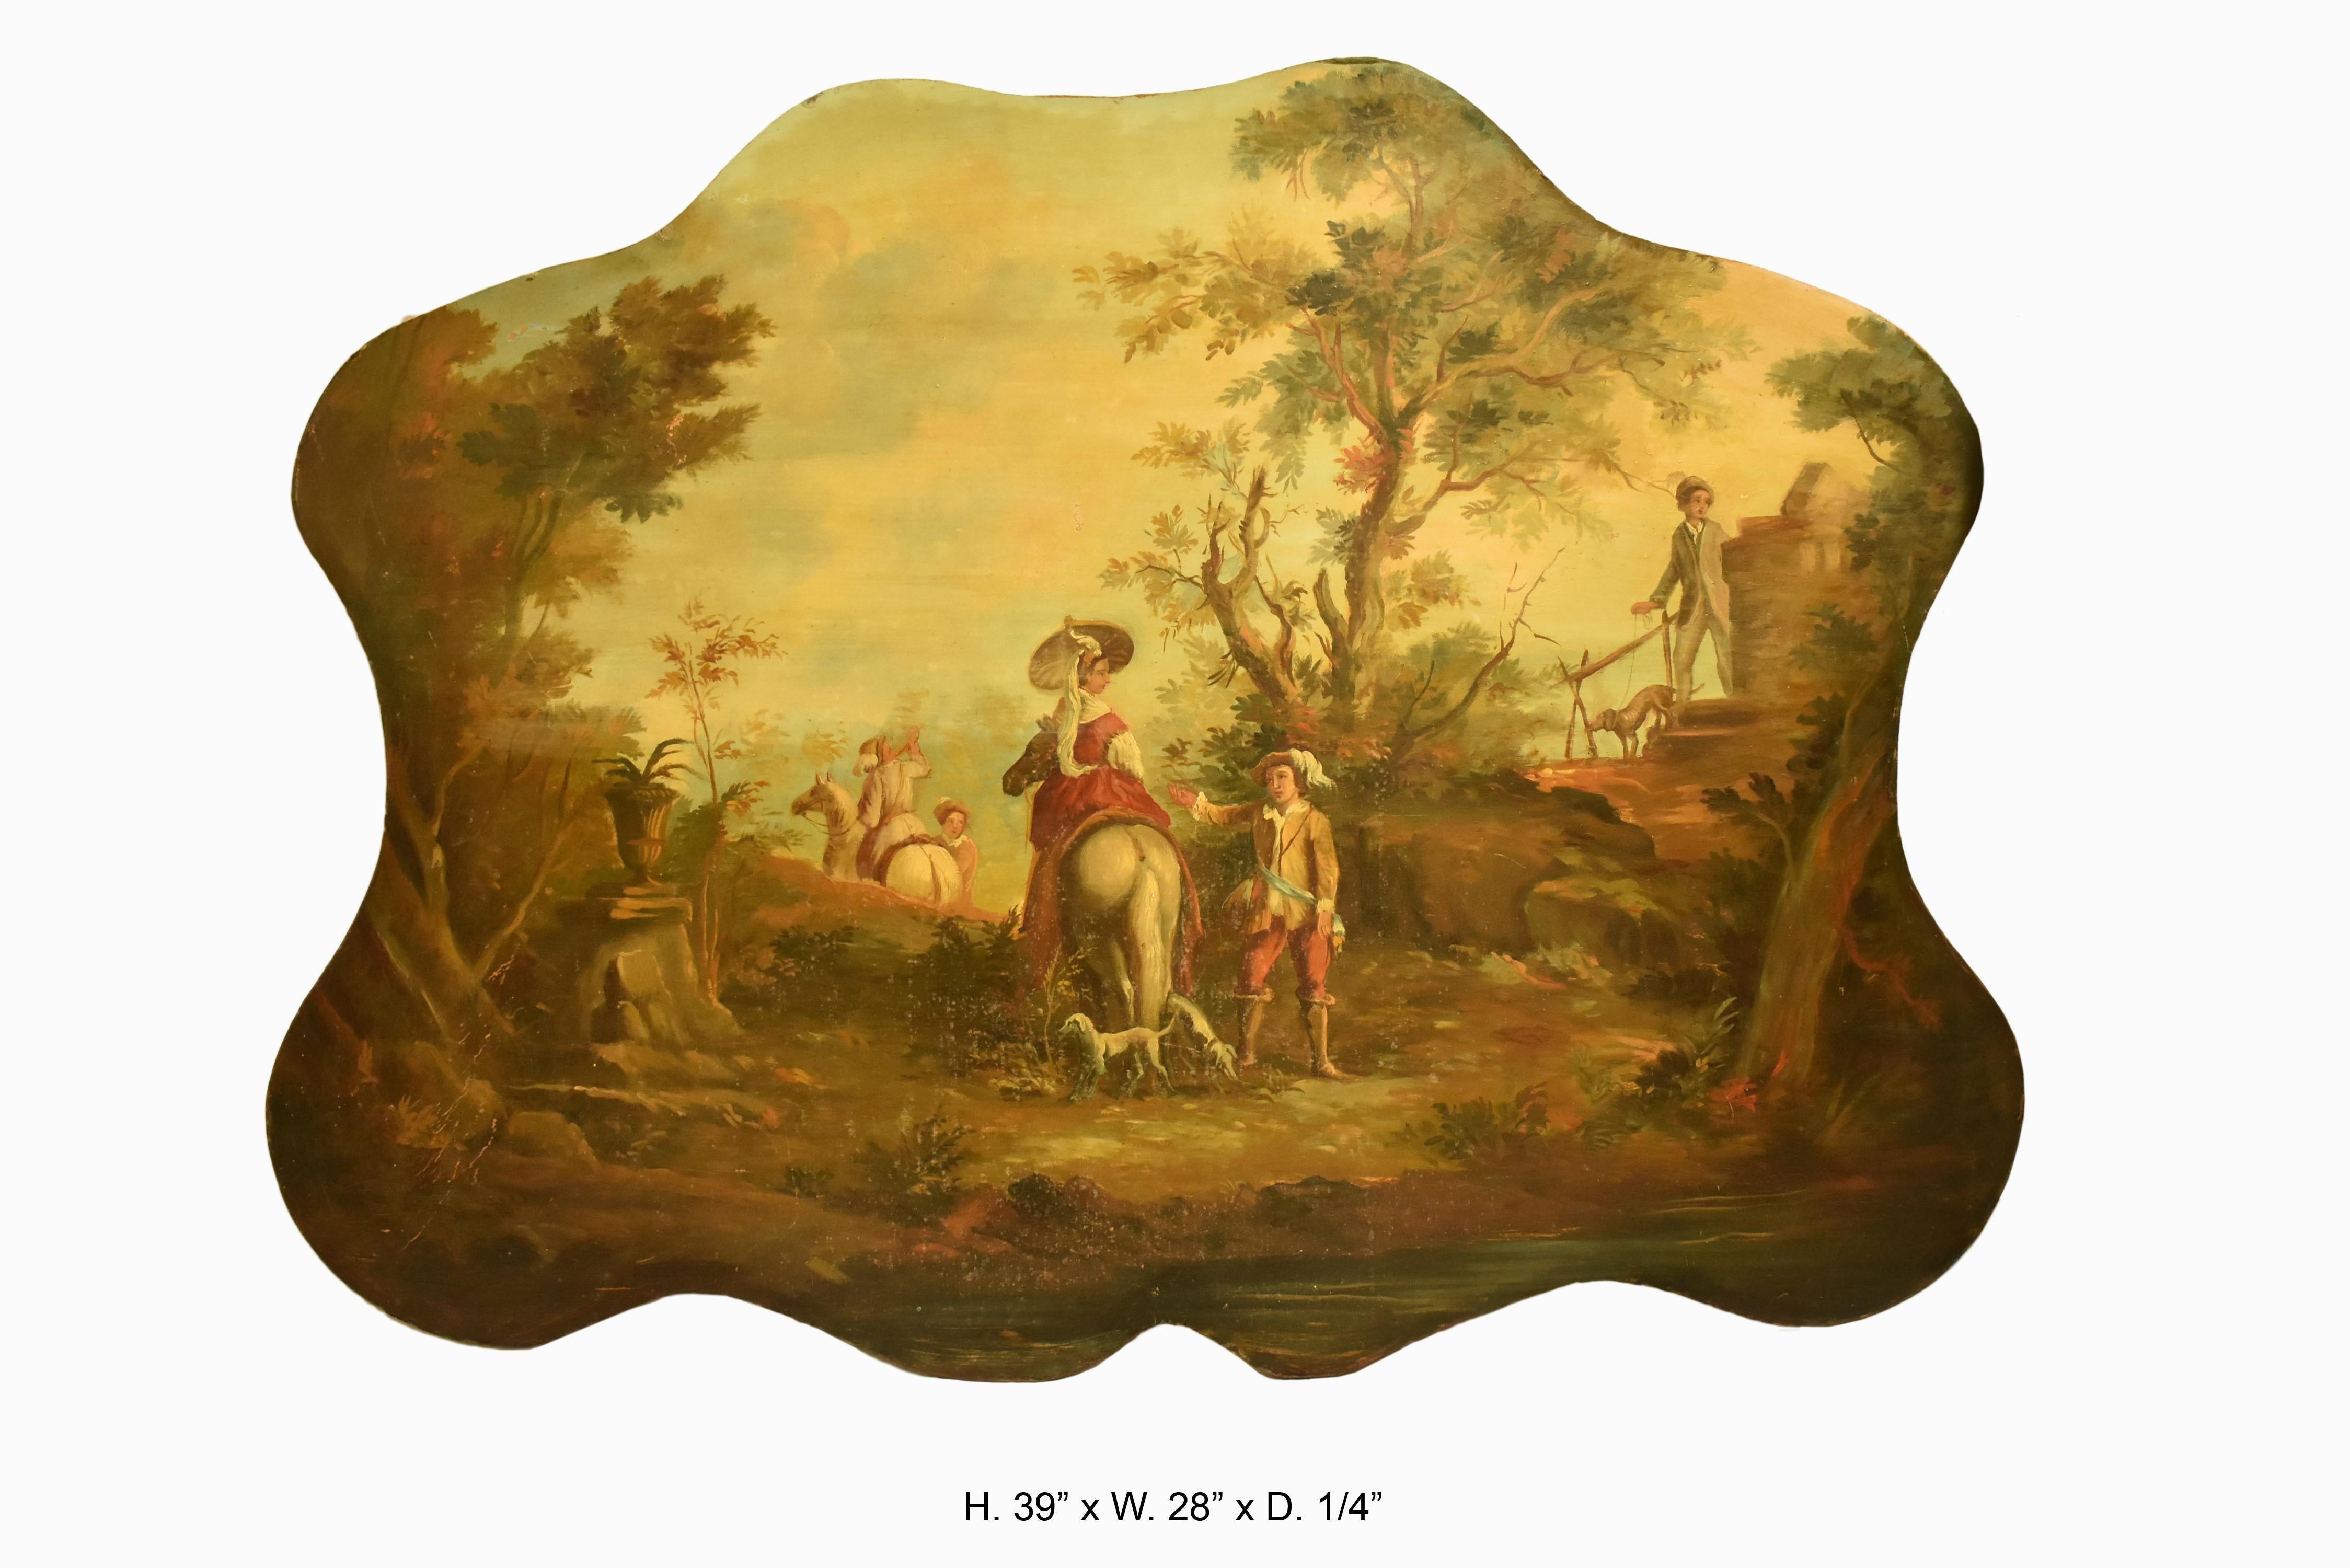 Highly decorated French oil on board painting of a romantic scene, first half of 20th century.
Possibly oil on canvas glued on board.
Uniquely shaped French oil on board painting depicting a romantic scene of a man dressed in traditional clothing